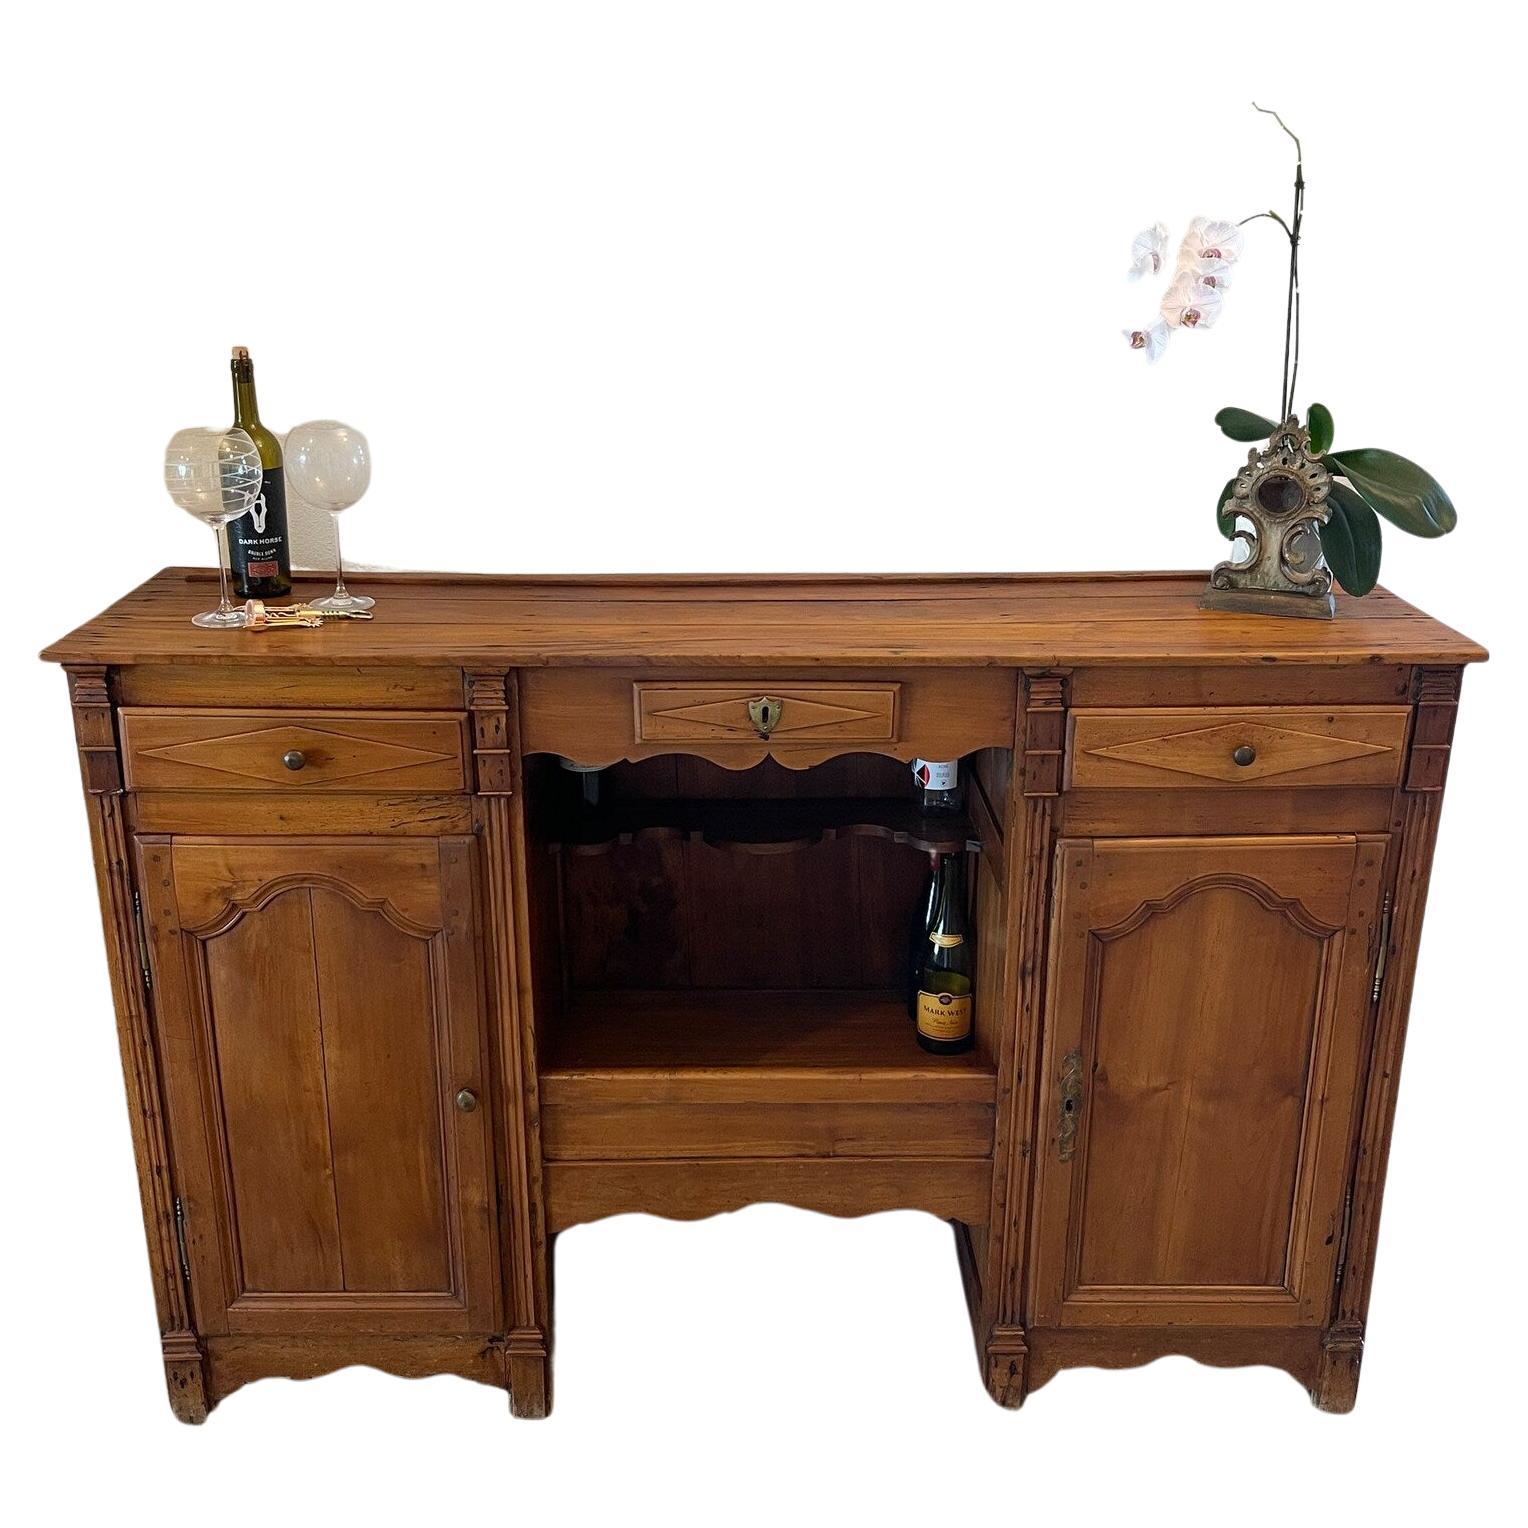 Early 19th Century Country French Bordeaux Sideboard For Sale